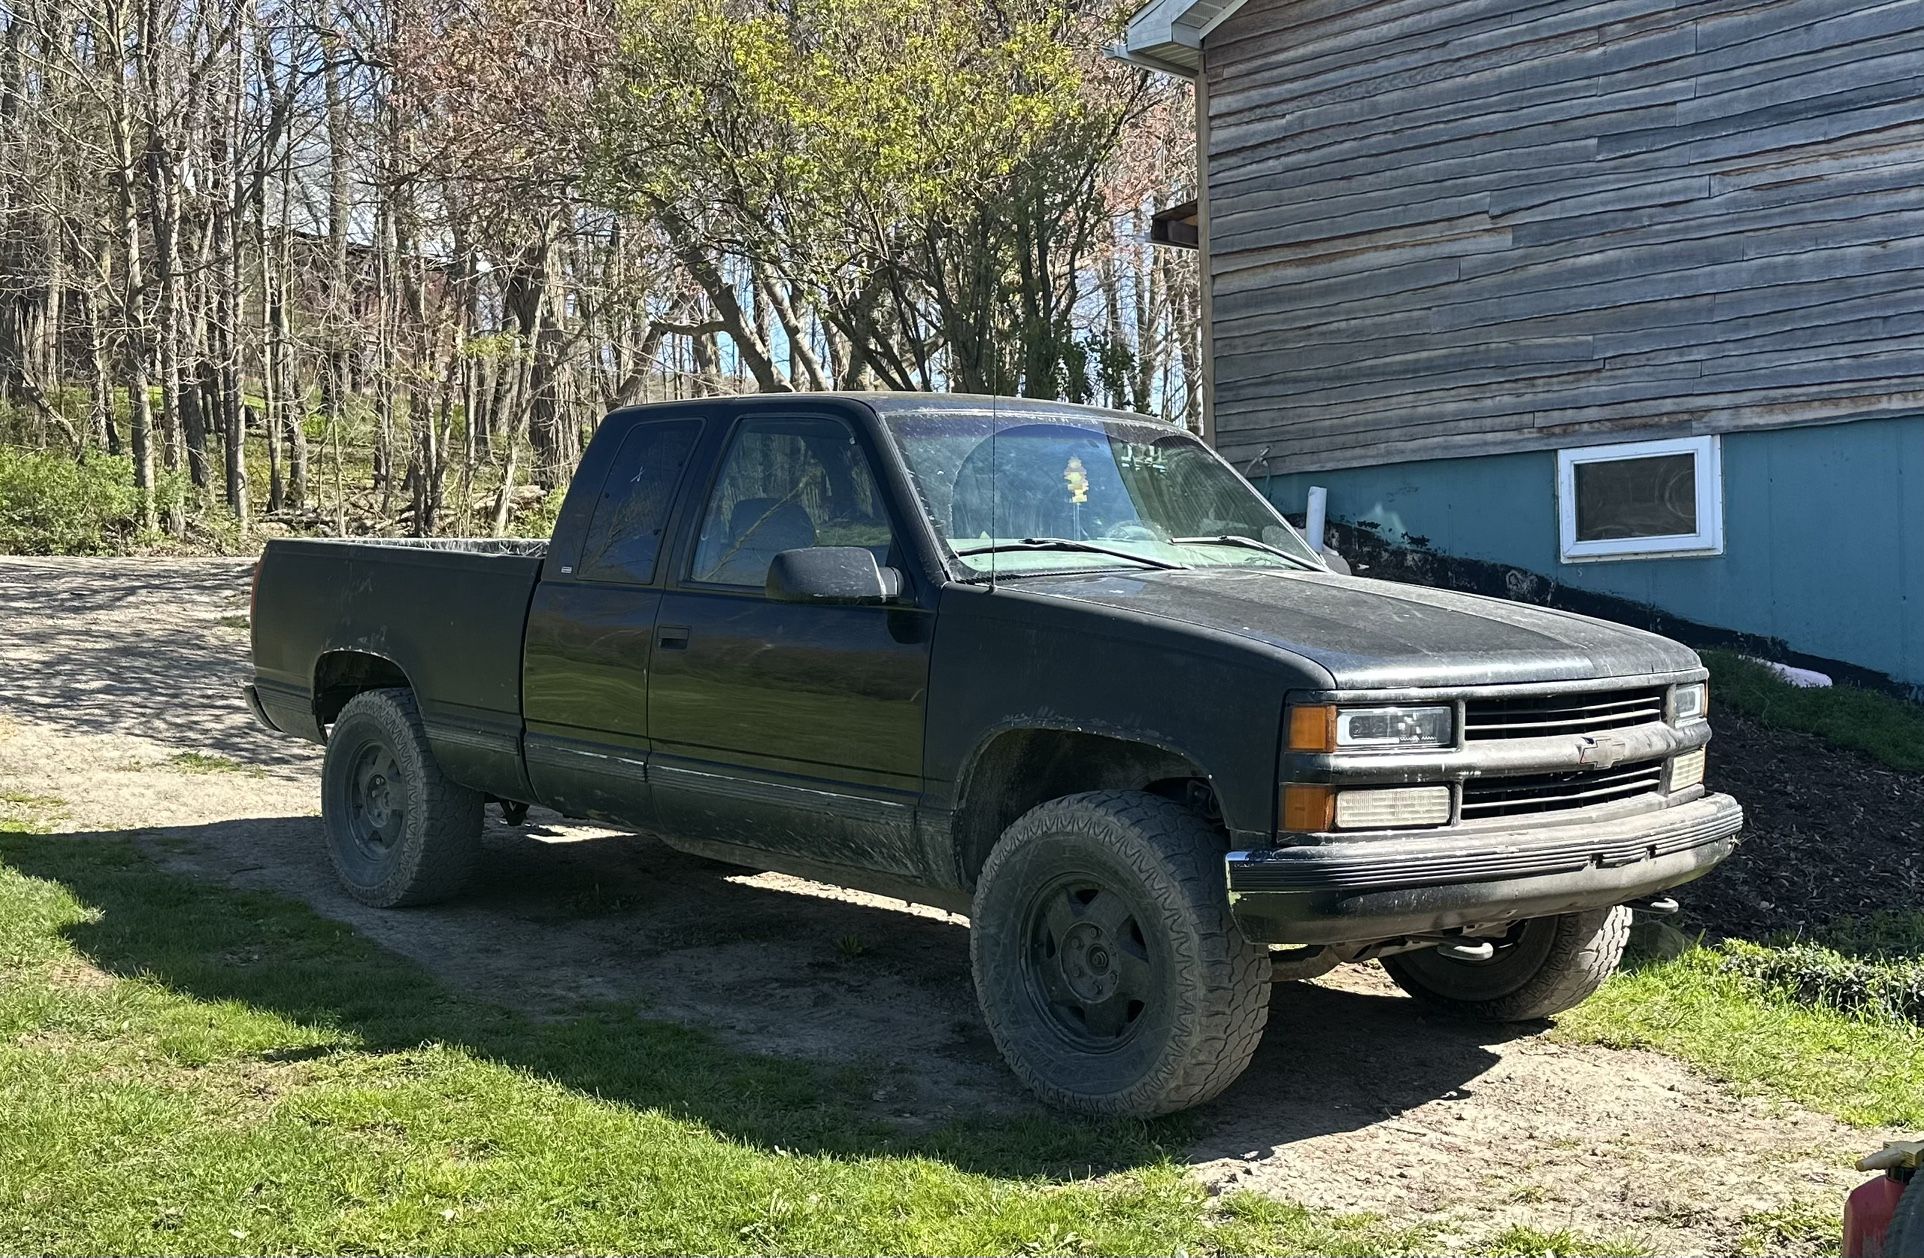 "1998 Chevy Cheyenne: Fair Condition, Lots of New Parts